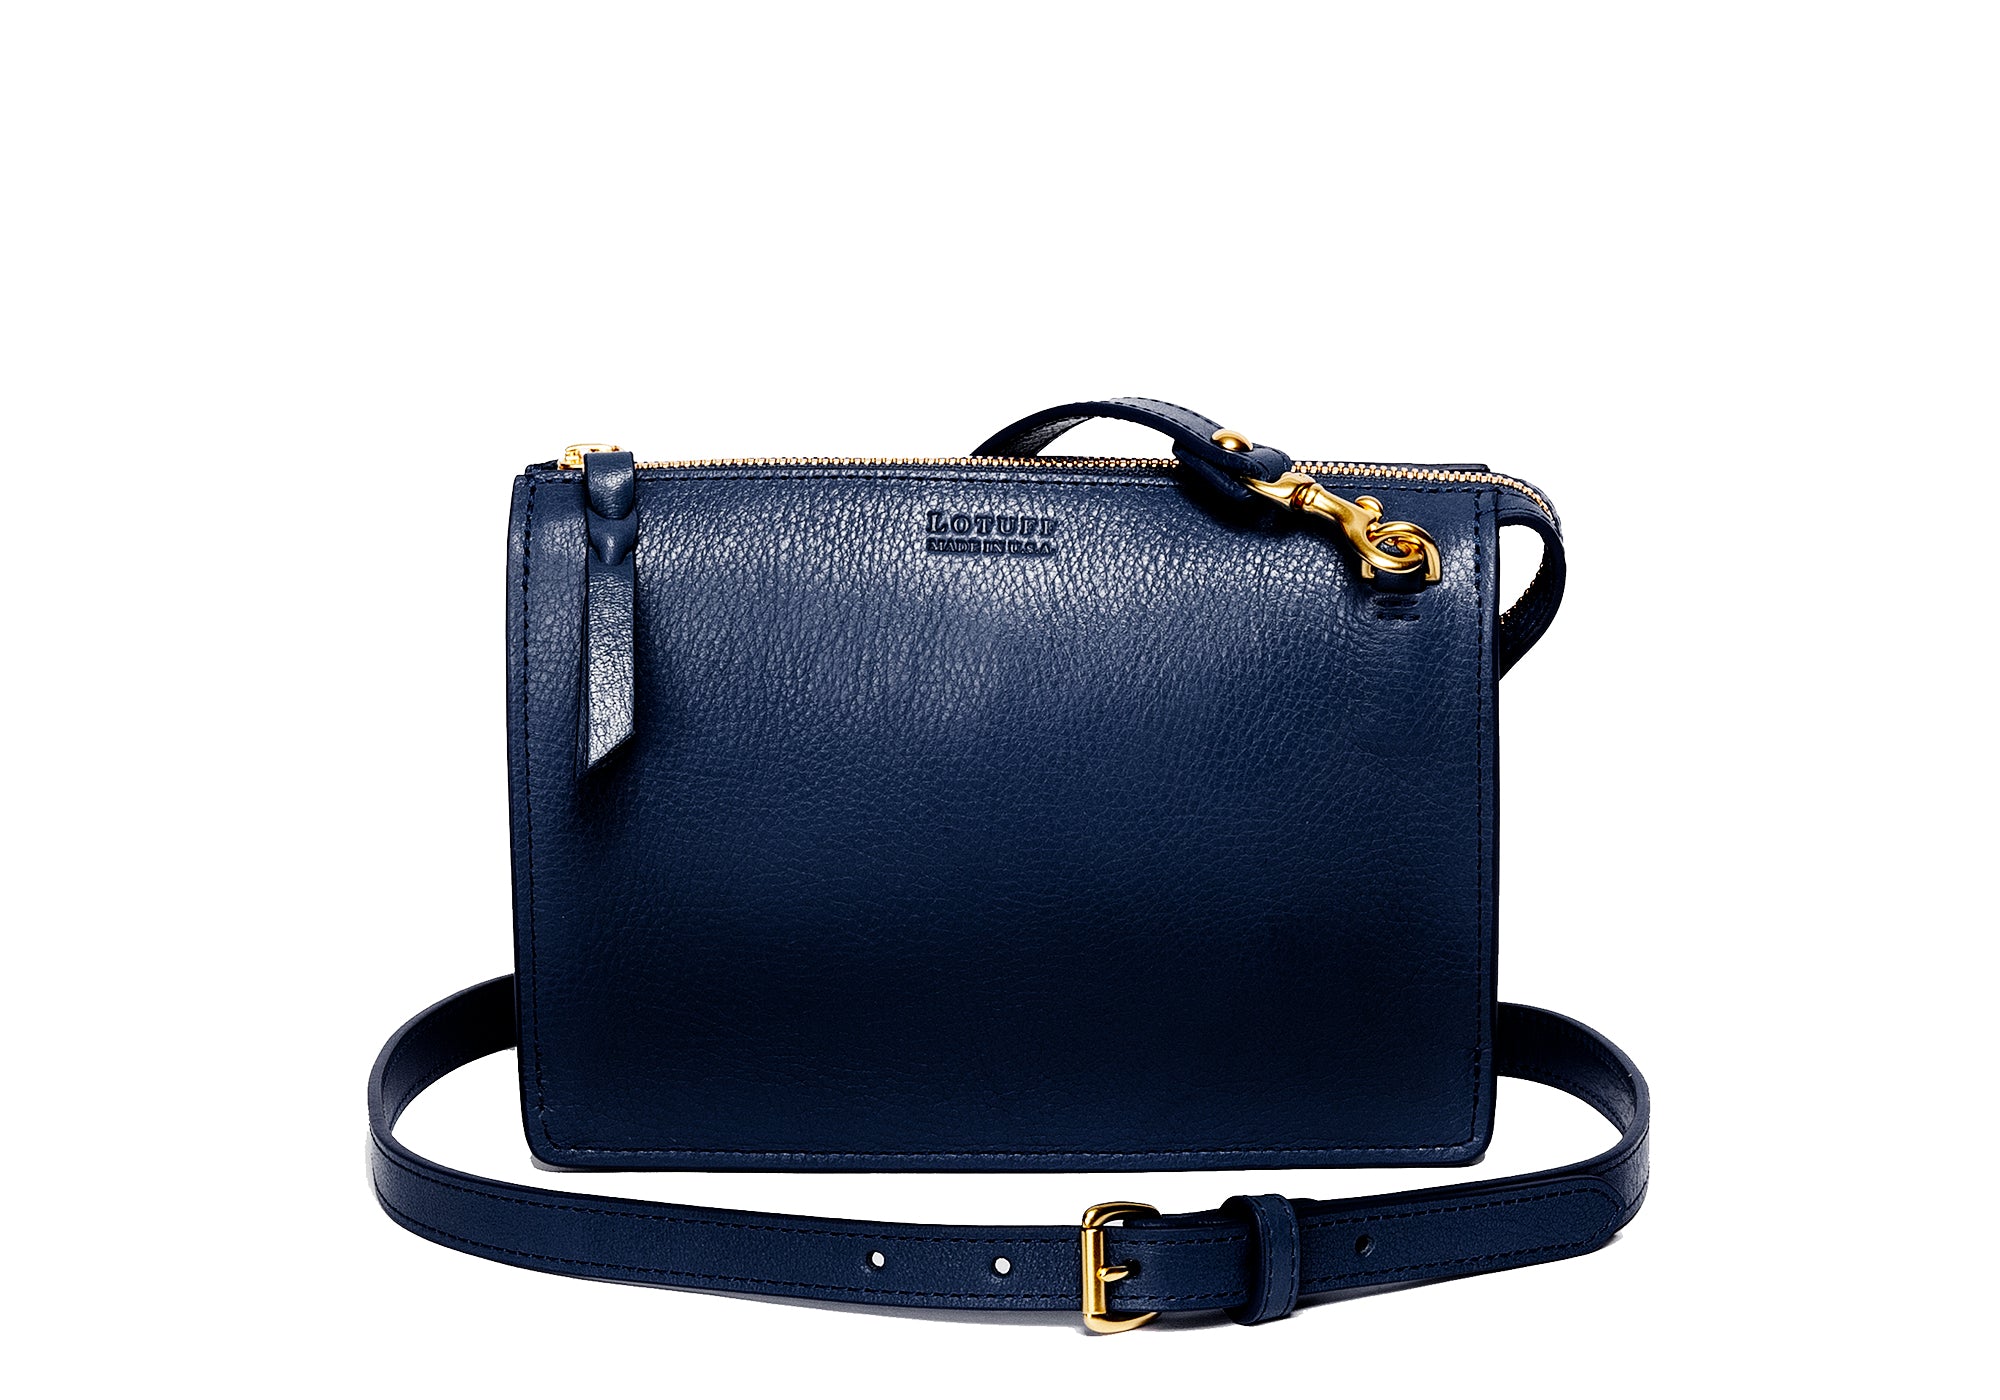 Neiman Marcus Tote Bag Spring Beauty Event 2018 Navy Blue Faux Leather Purse  | Faux leather purse, Bags, Faux leather